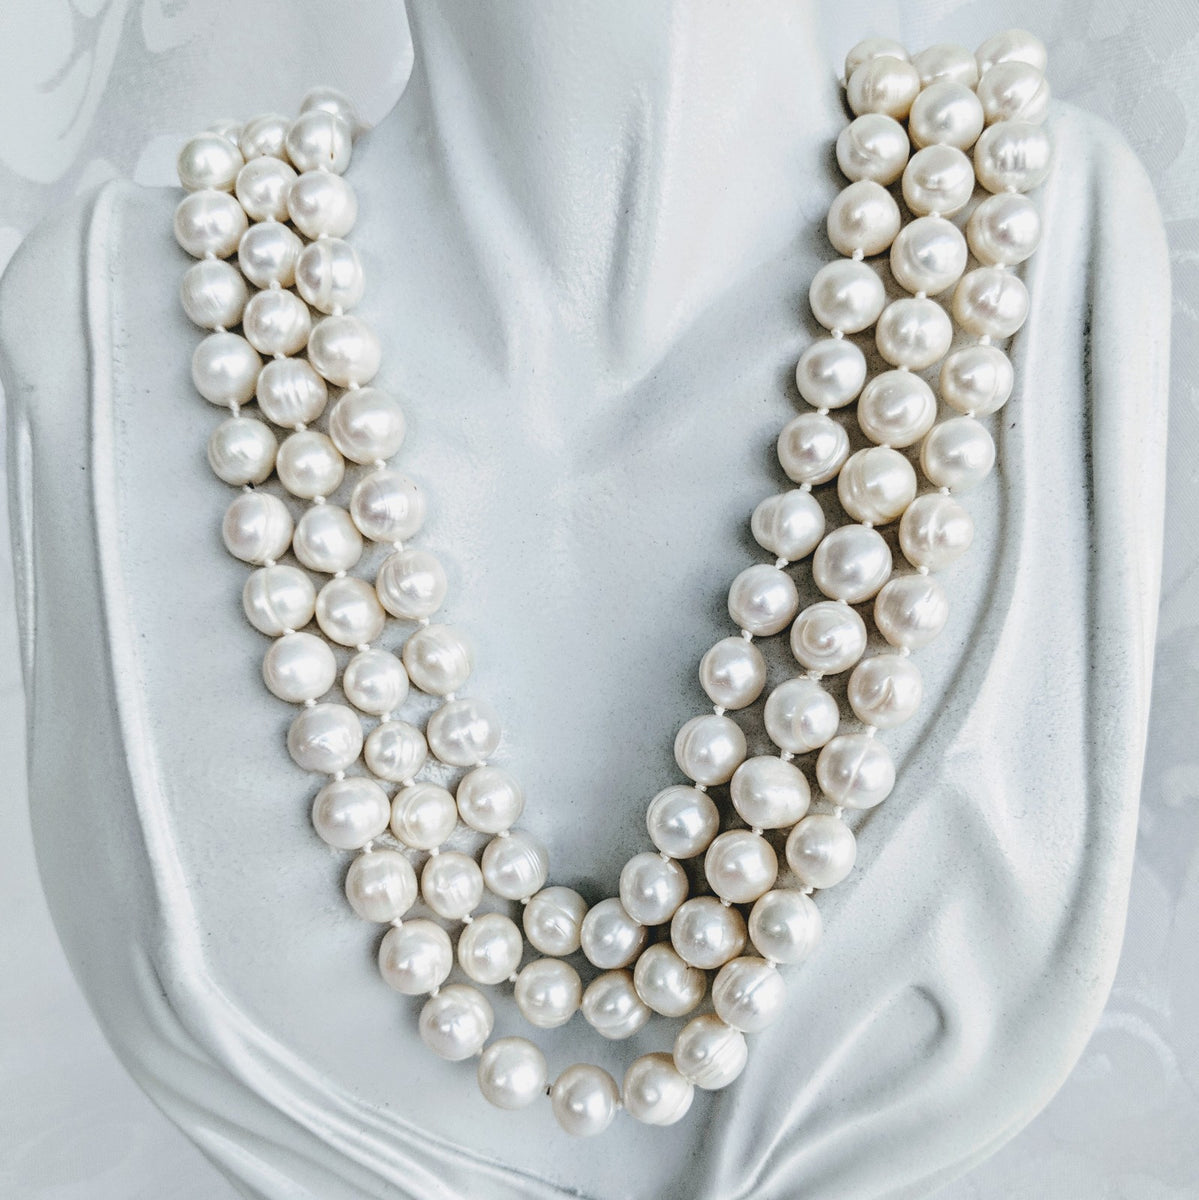 Double strand cultured freshwater pearl necklace